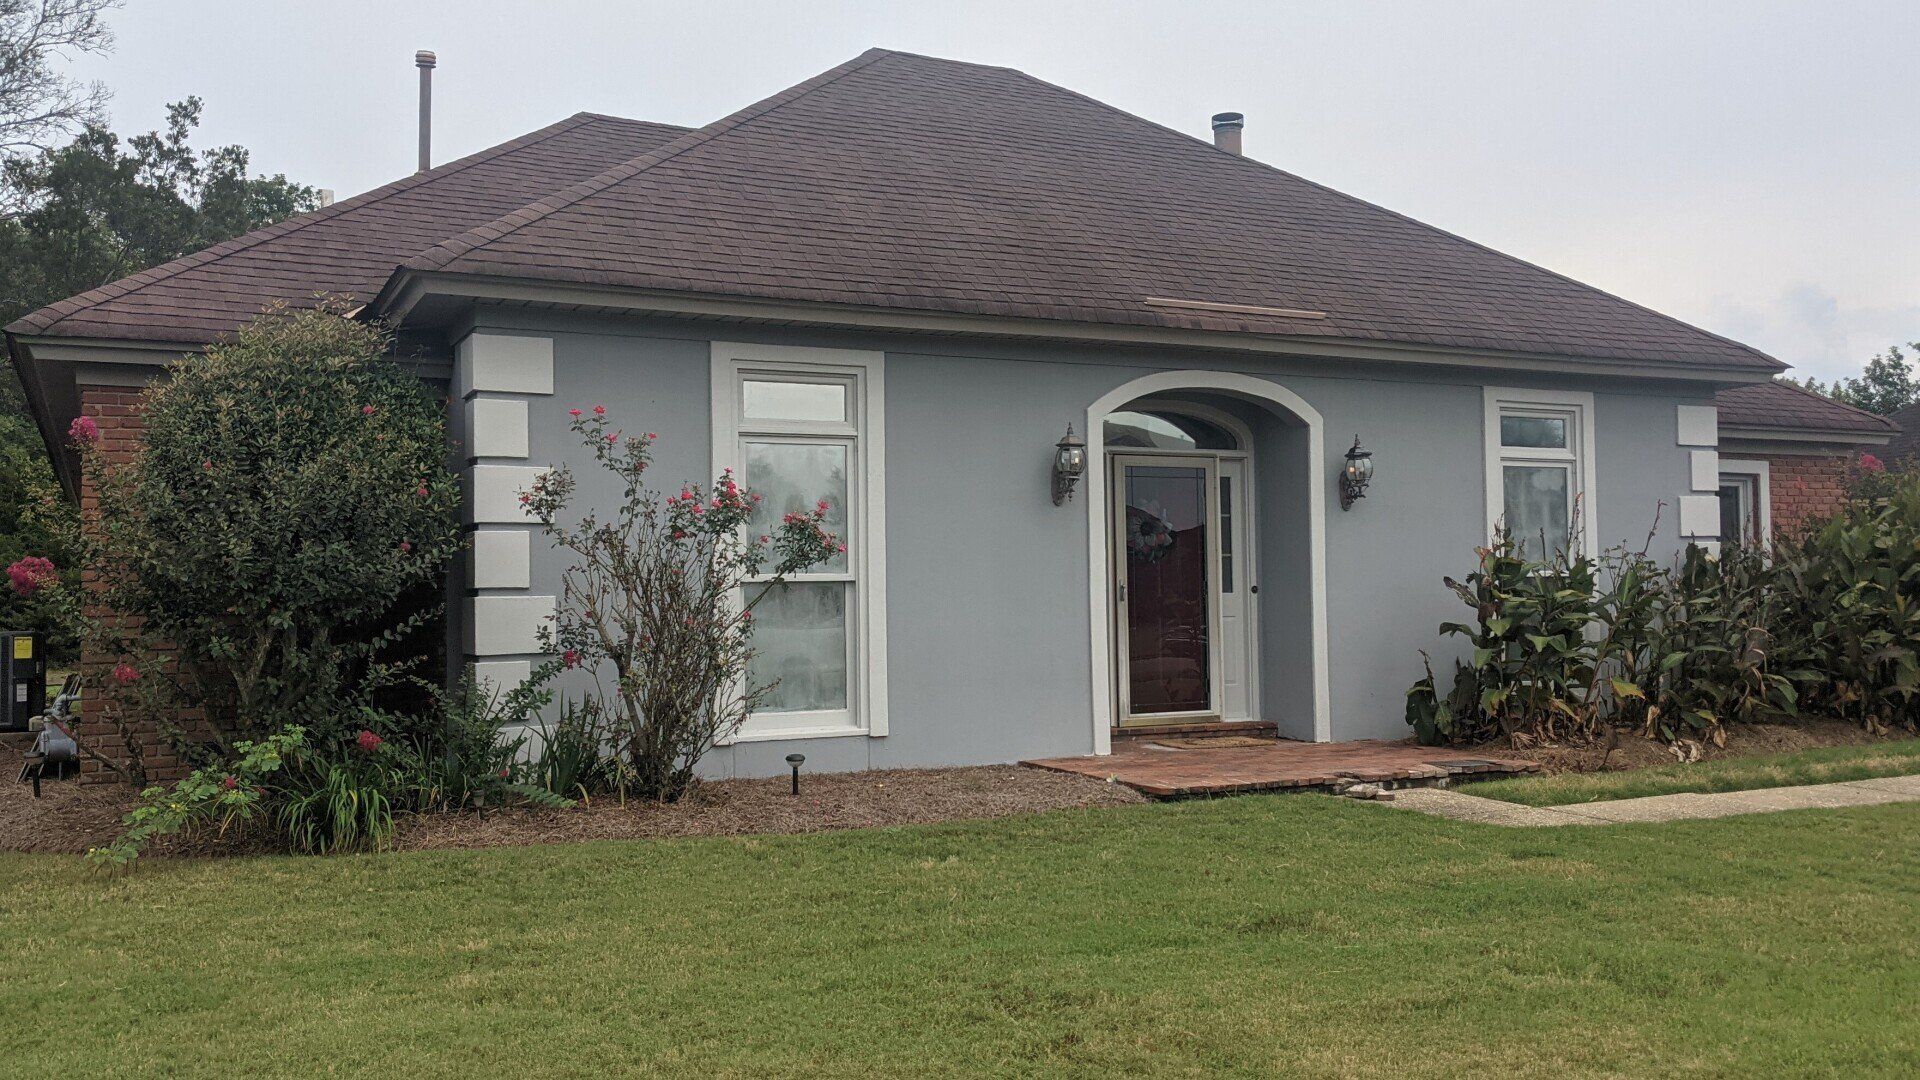 Residential window tinting - SPF Performance ULTRA blocked heat and glare from entering this home in Montgomery, AL